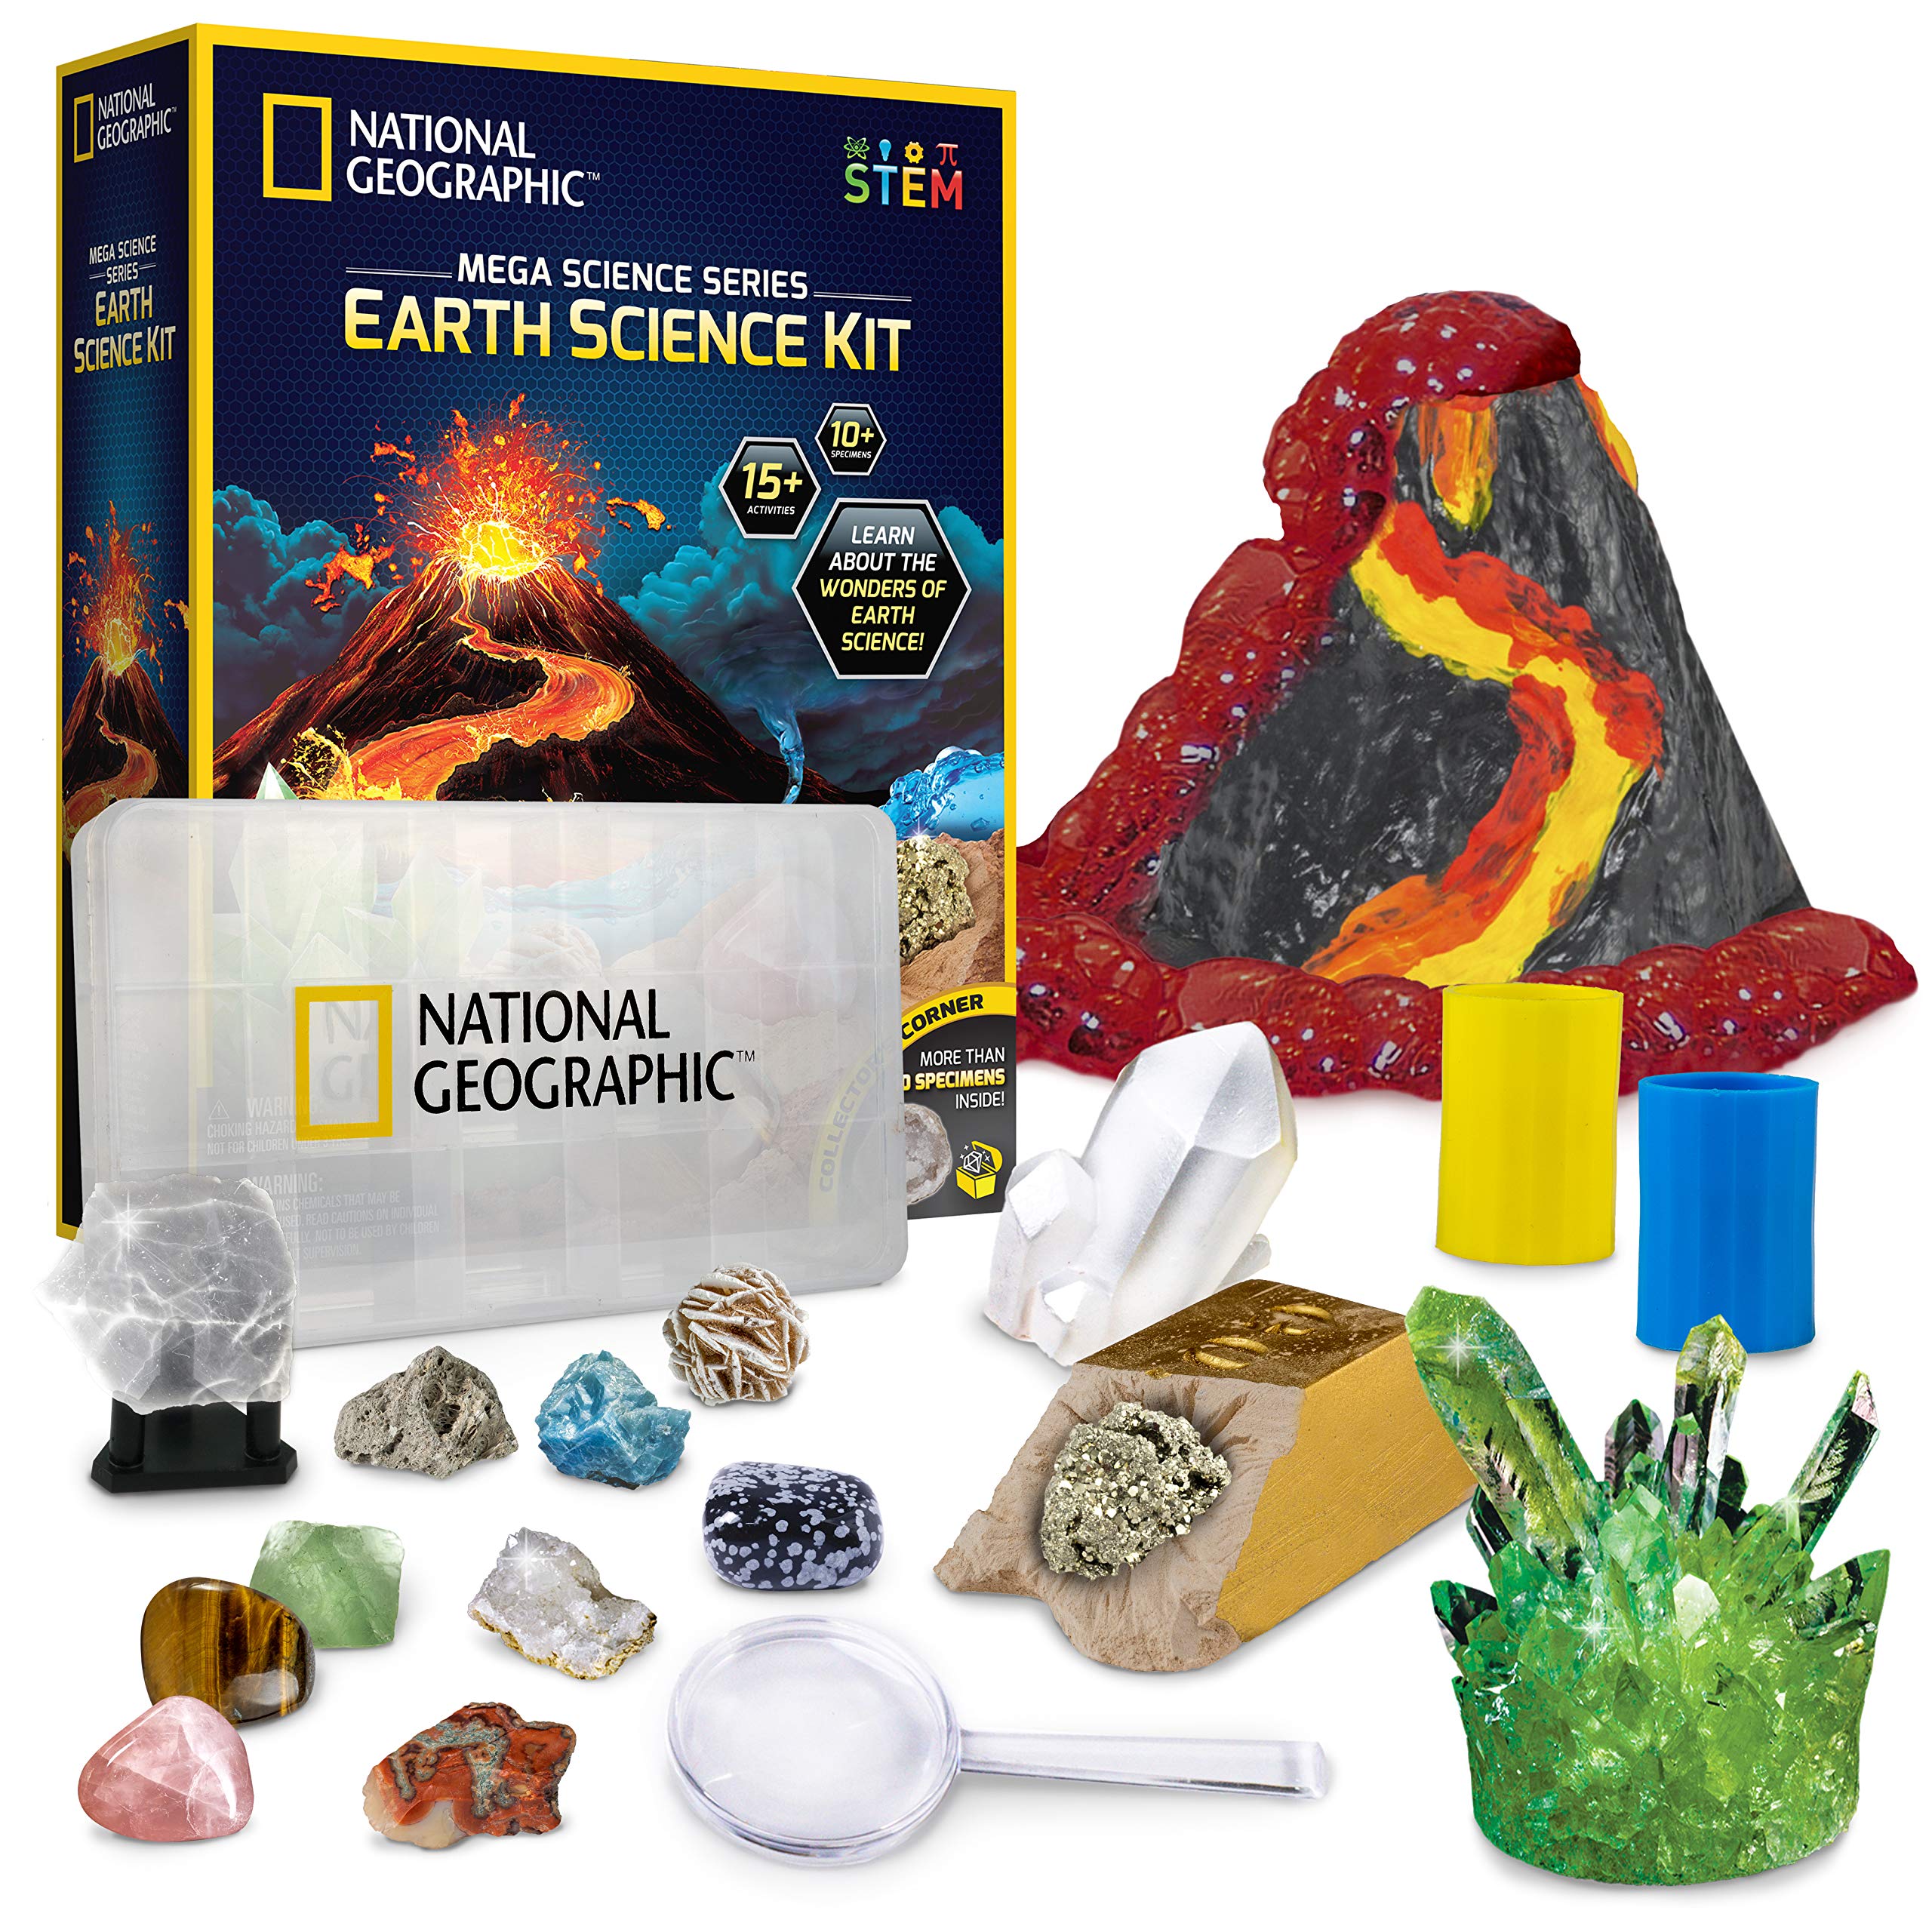 NATIONAL GEOGRAPHIC Earth Science Kit – Over 15 Science Experiments & STEM Activities for Kids, Crystal Growing, Erupting Volcanos, 2 Dig Kits & 10… – NATIONAL GEOGRAPHIC >>> top1shop >>> fado.vn